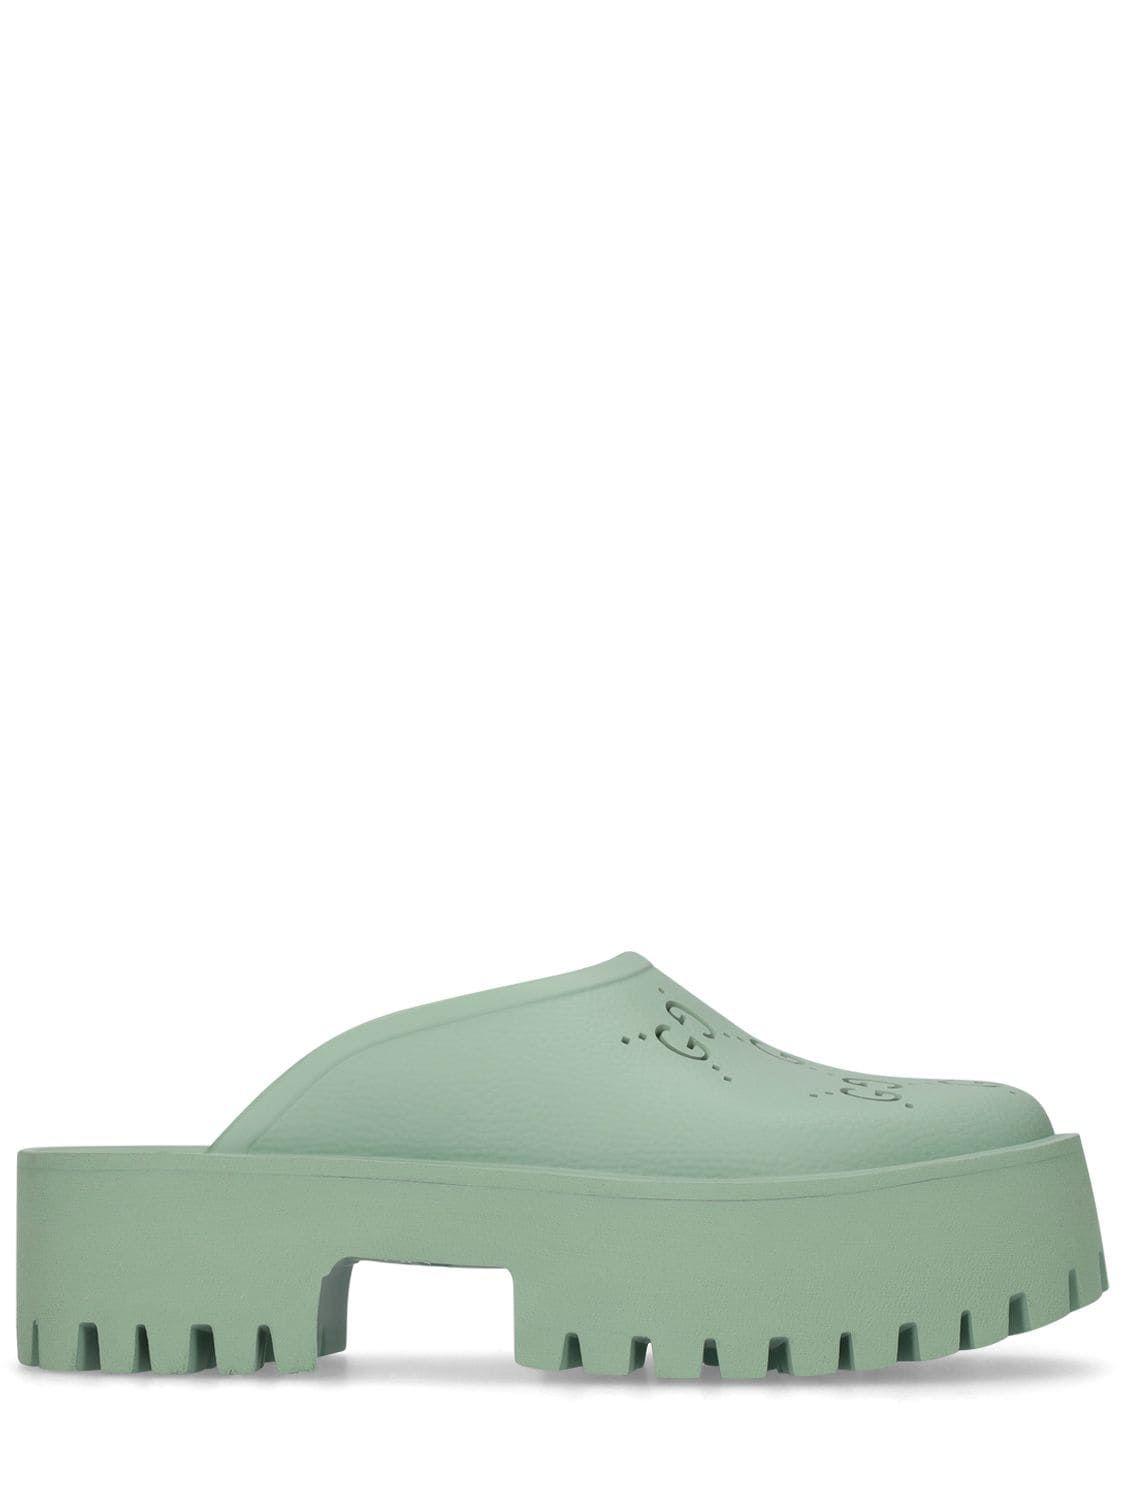 Gucci 55mm Elea Perforated G Platform Sandals in Green | Lyst